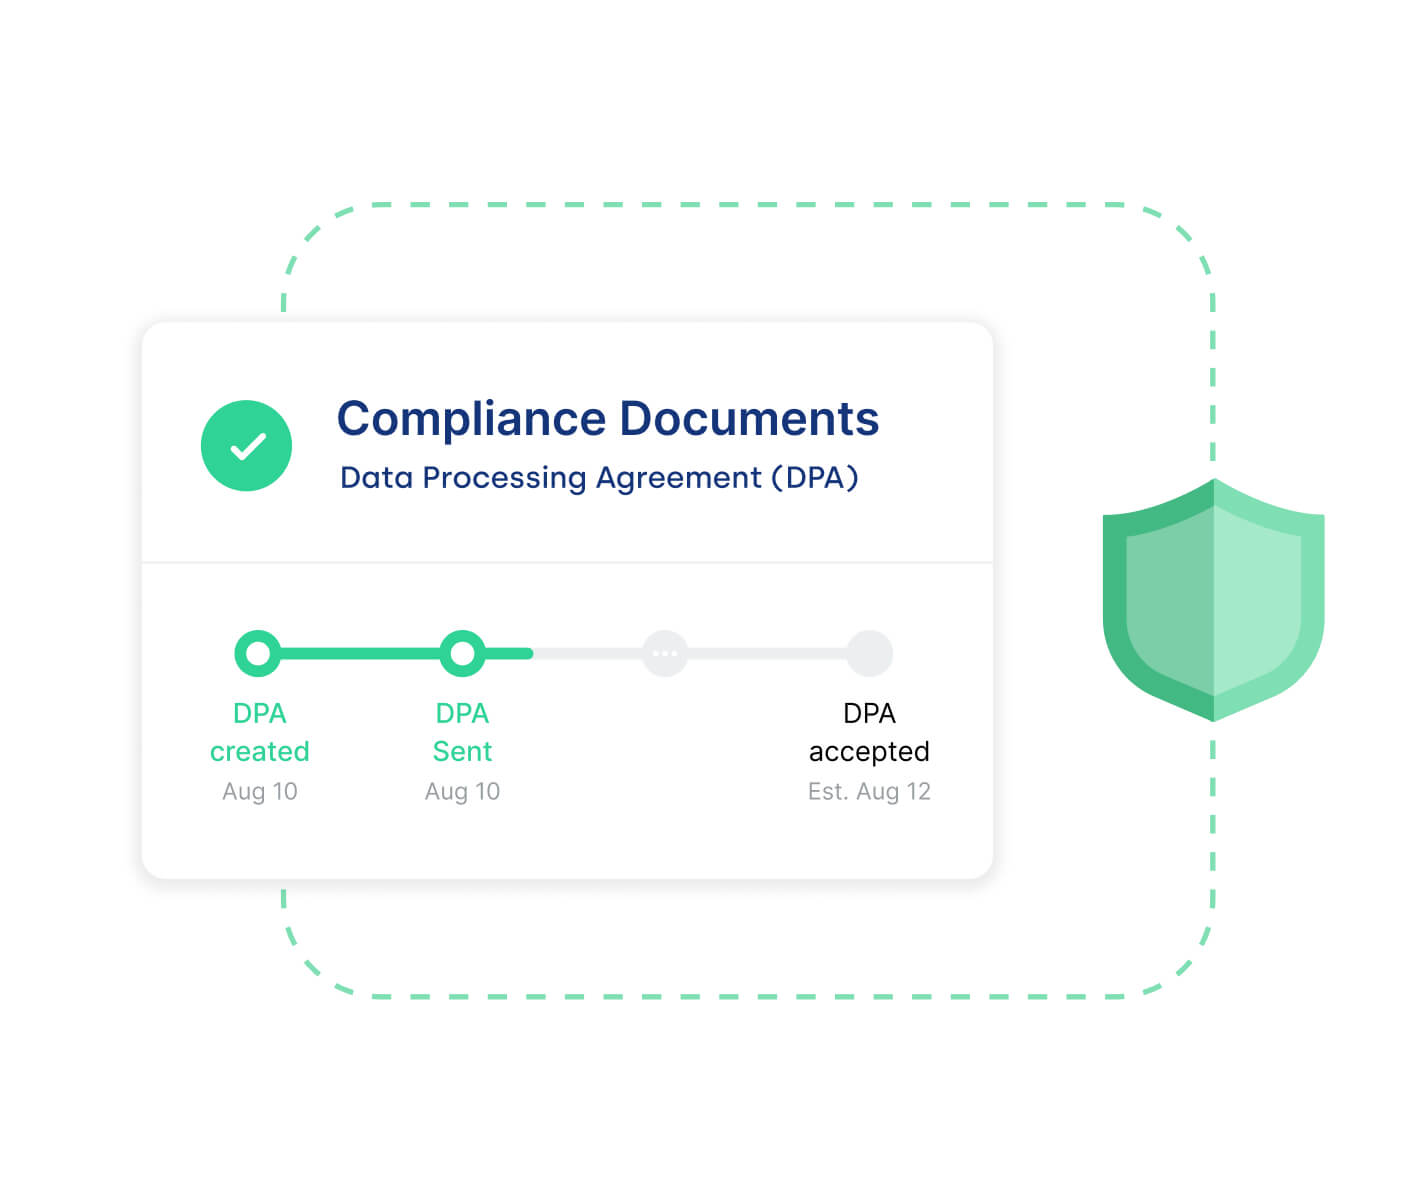 Compliance Documents image